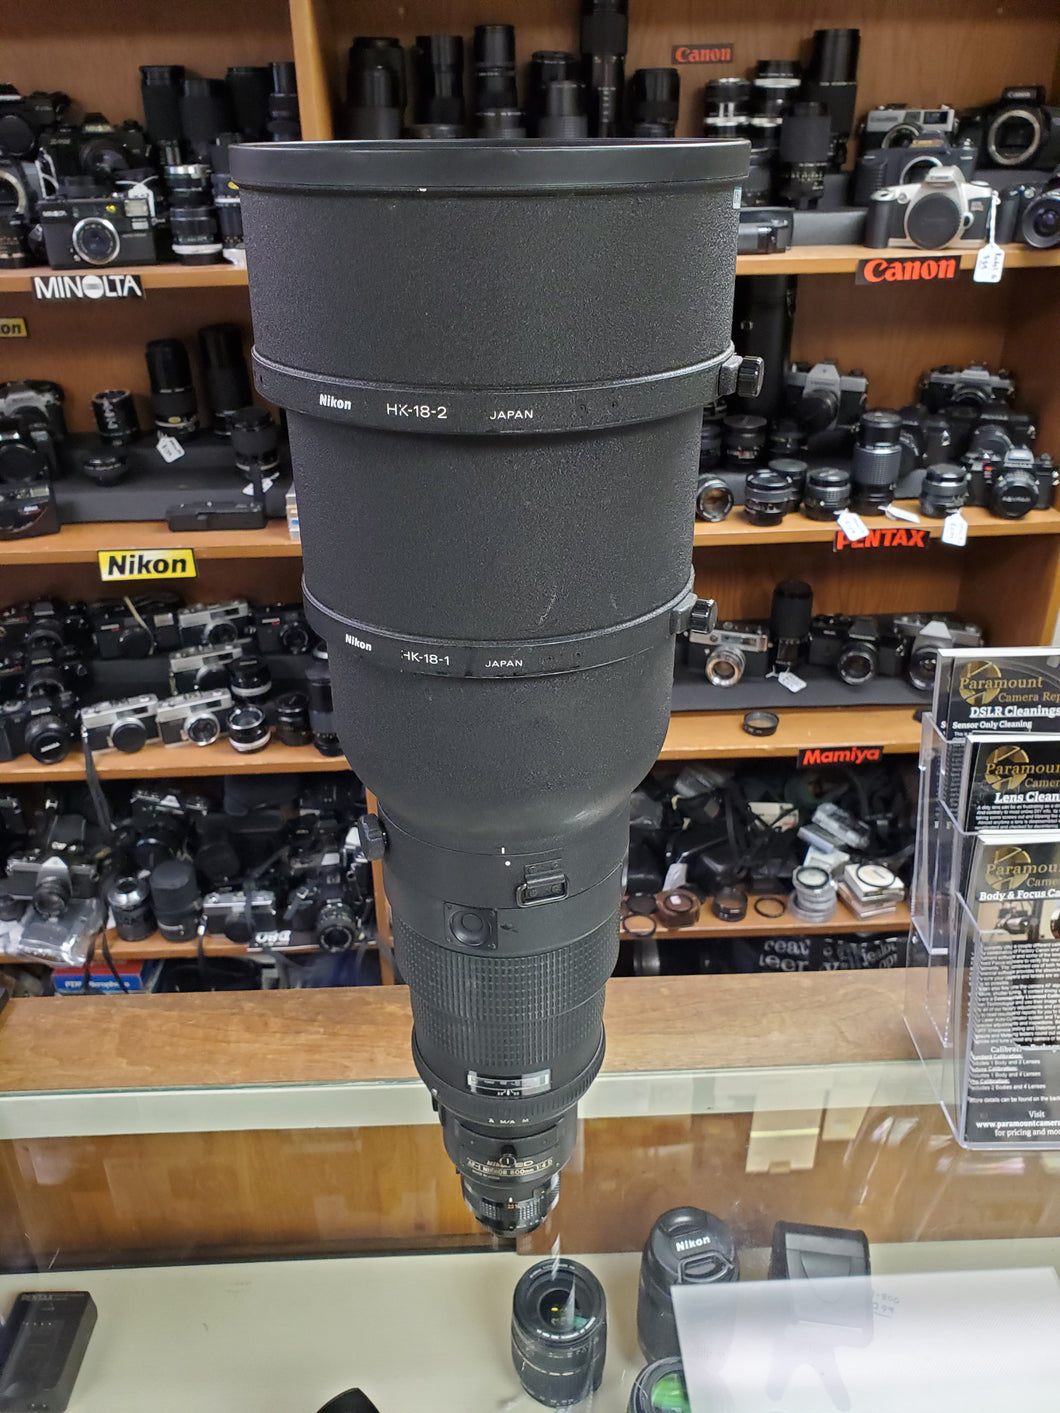 Nikon 600mm F/4 D ED IF AF-I Super Telephoto - AS-IS - Paramount Camera & Repair